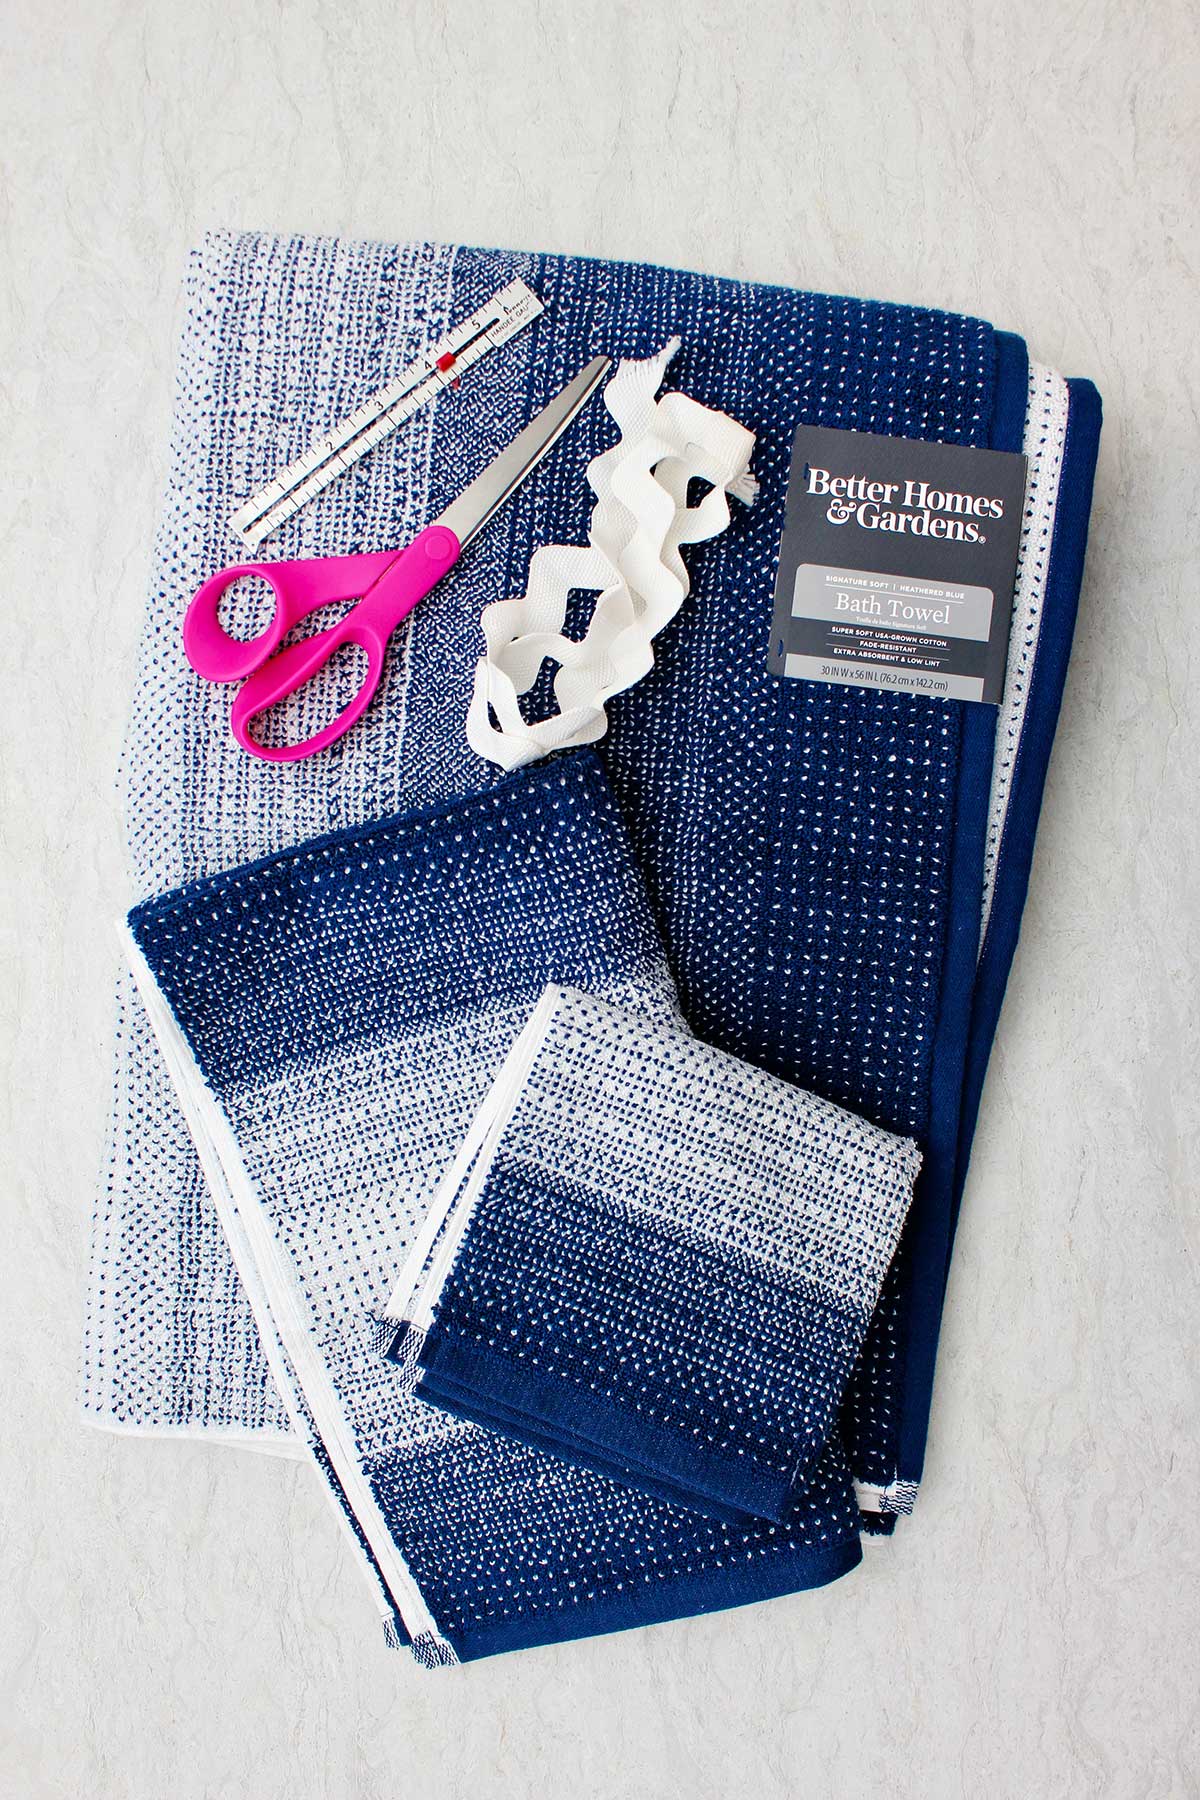 Blue and white patterned towels, a pair of pink scissors, ruler and white ric rack trim.